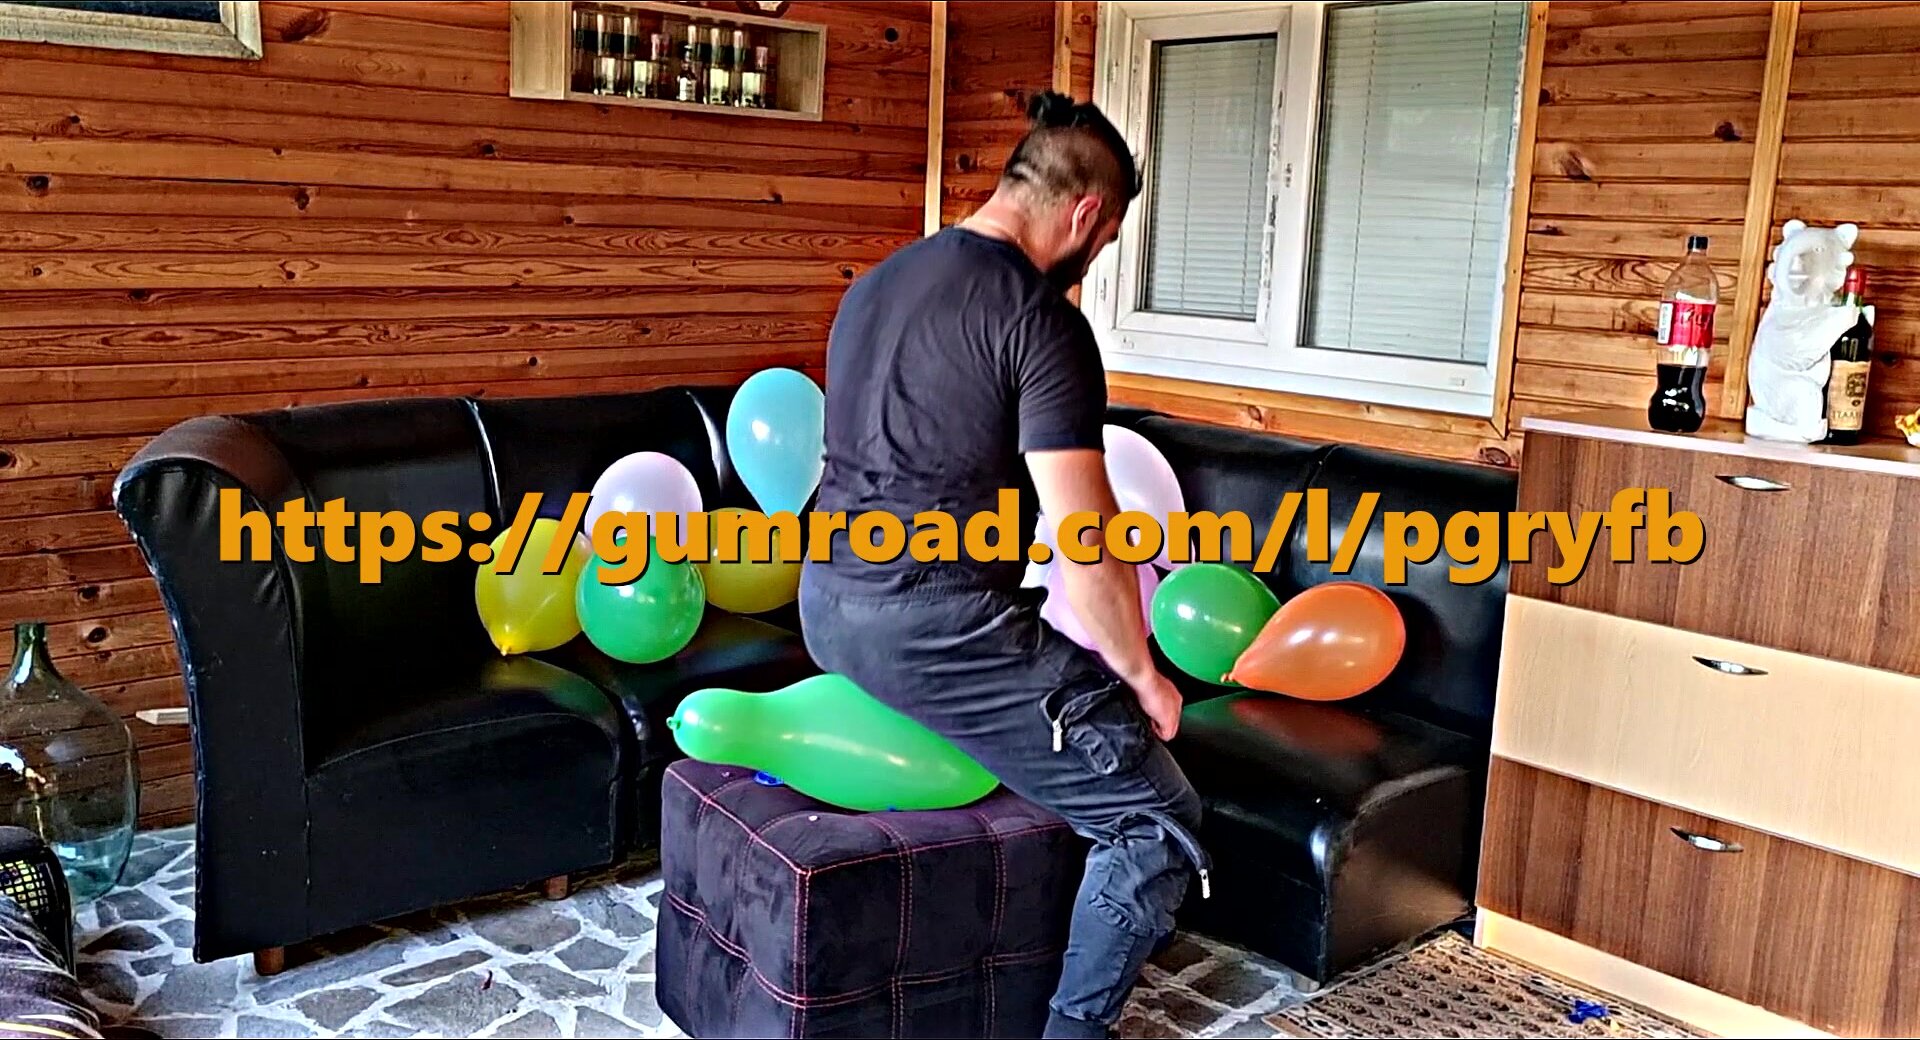 Preview: James The Popper Vol 2 - More balloons!